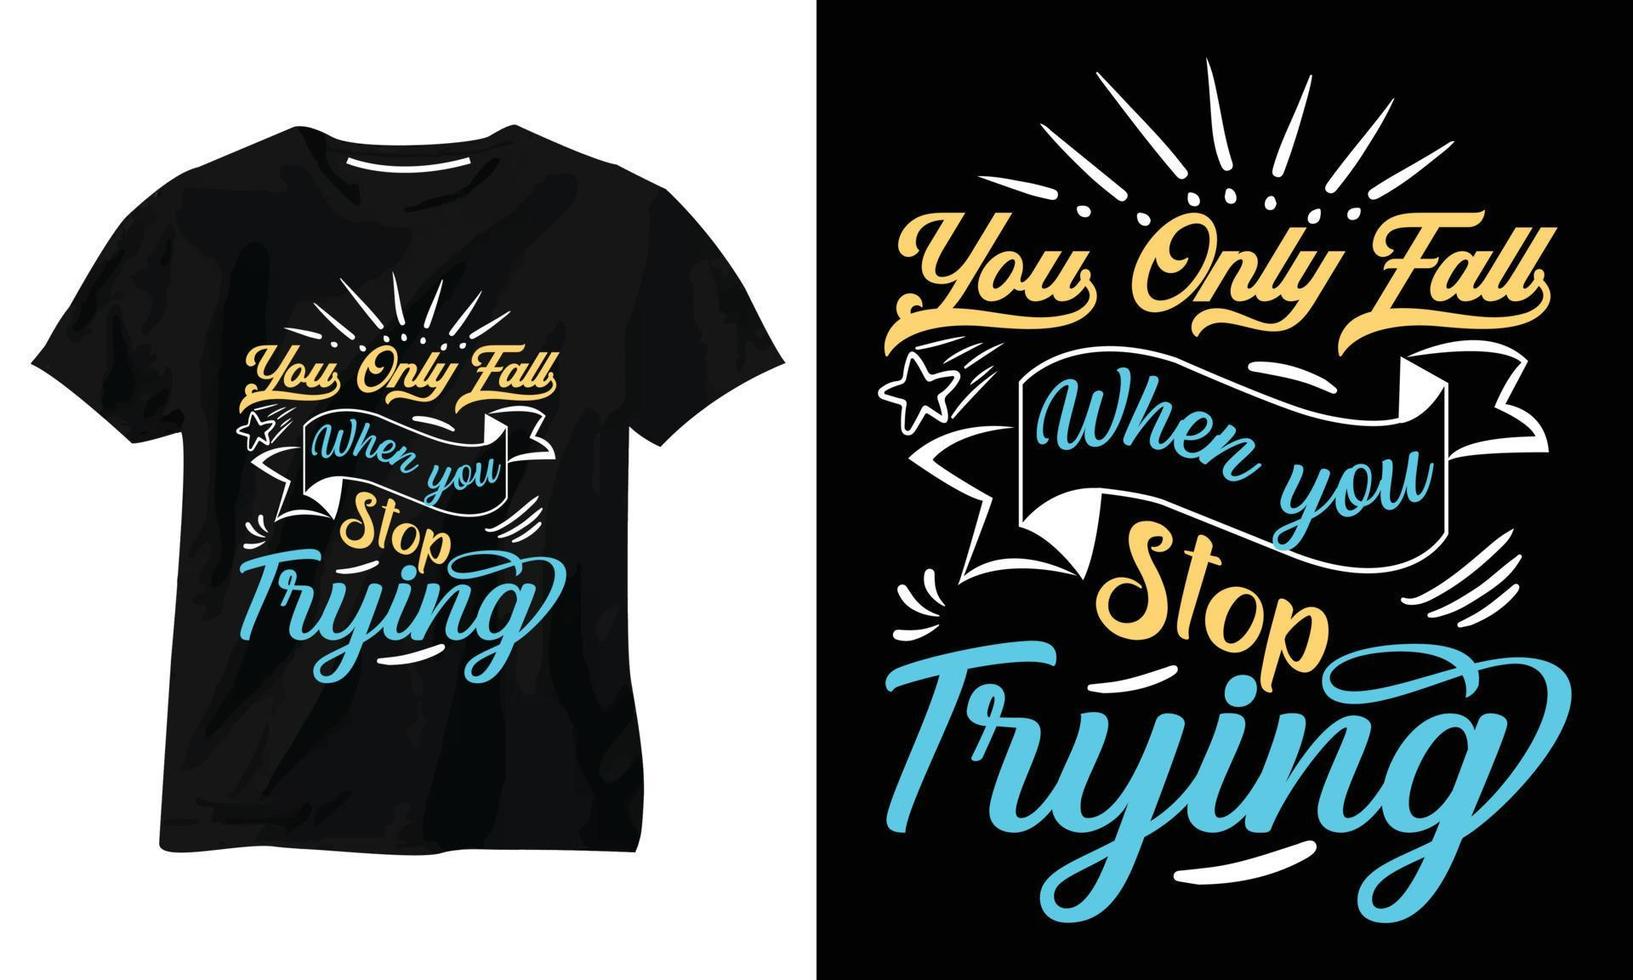 You Only Fall When You Stop Trying typography t shirt design vector